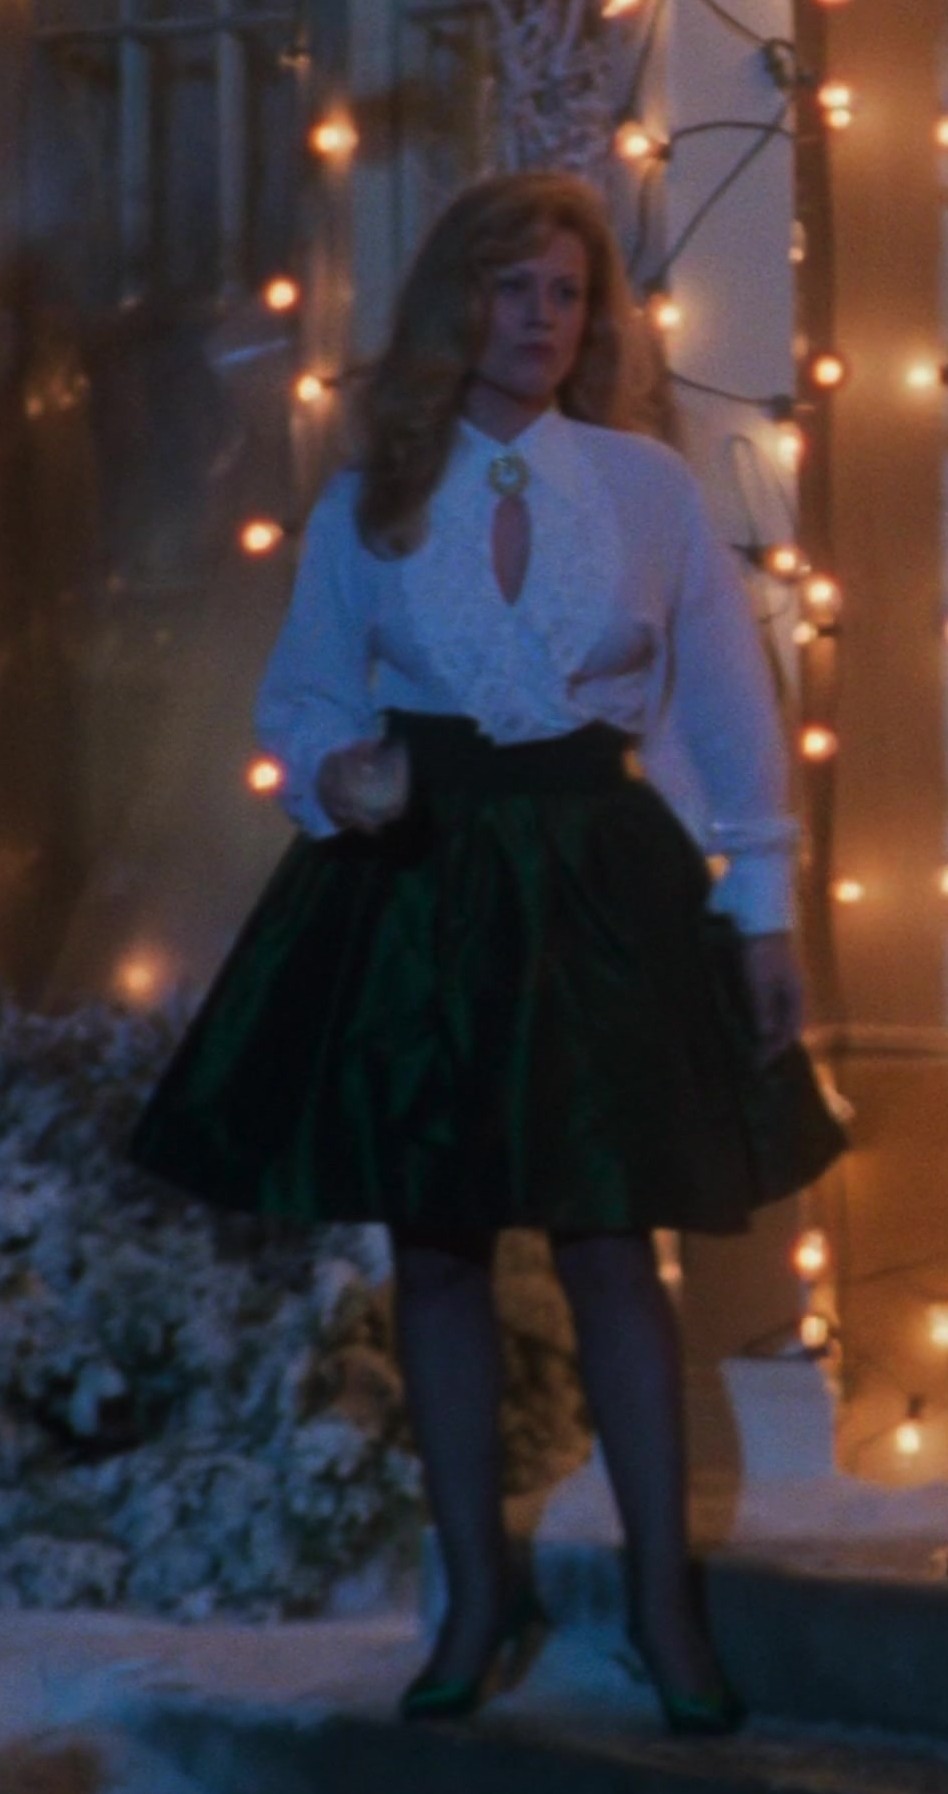 Worn on National Lampoon's Christmas Vacation (1989) Movie - Green High-Waist Voluminous Silhouette Midi Skirt Worn by Beverly D'Angelo as Ellen Griswold